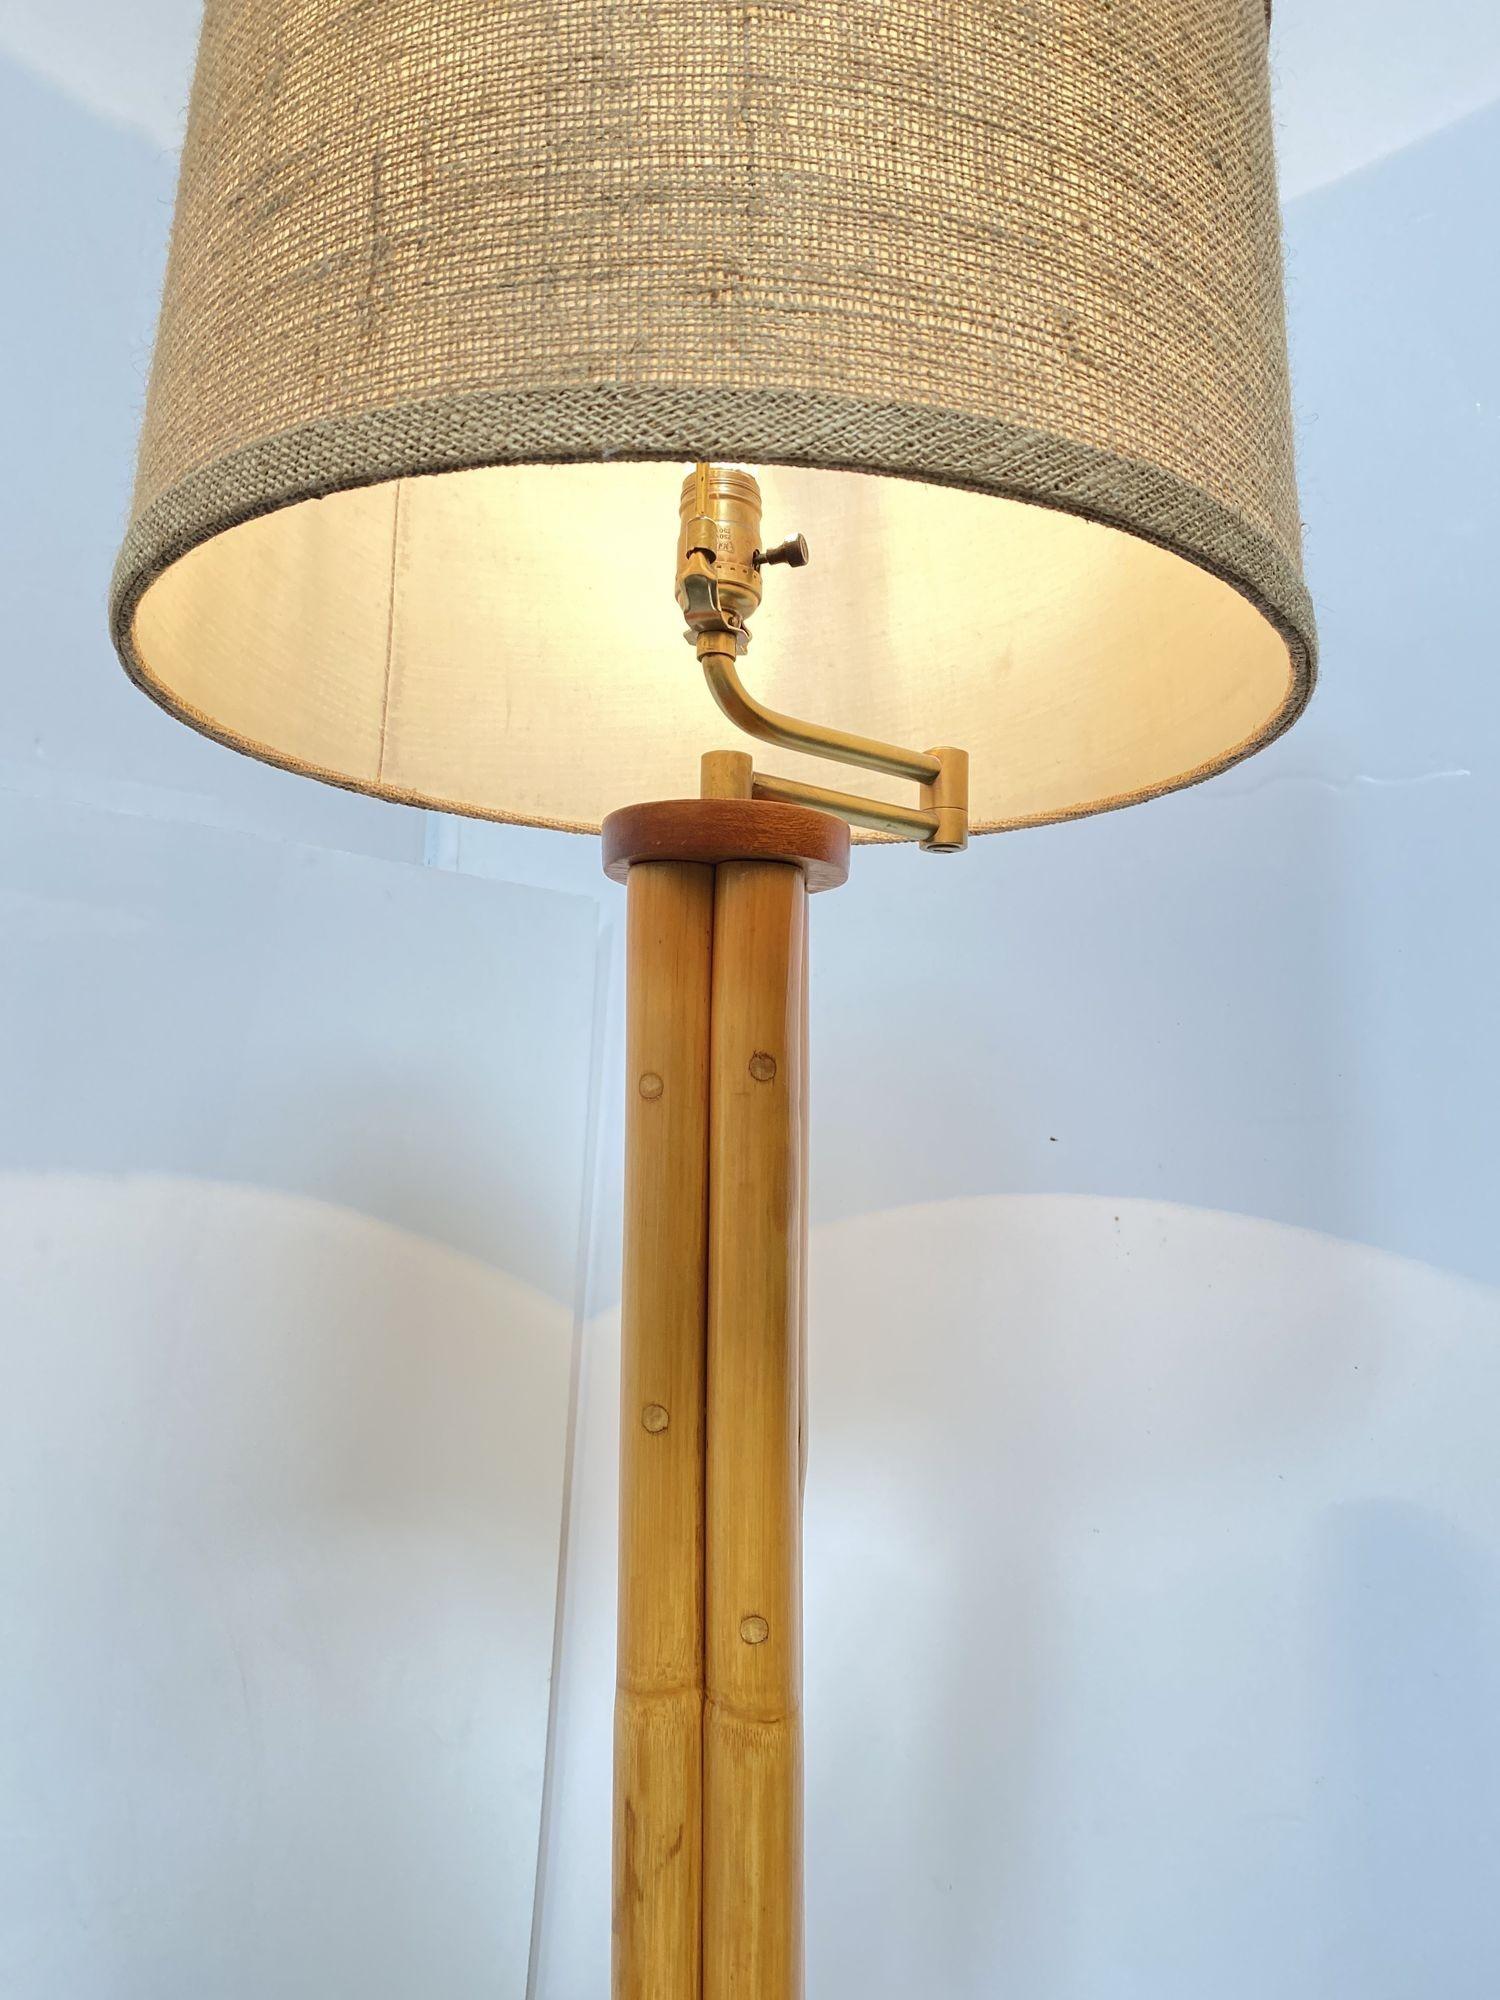 A rare bent rattan floor lamp featuring 3 decorative rattan poles centered around a rattan post all fixed to a mahogany and rattan circular drink stand supported by 3 one-of-a-kind bent rattan circular feet, circa 1950.
We only purchase and sell